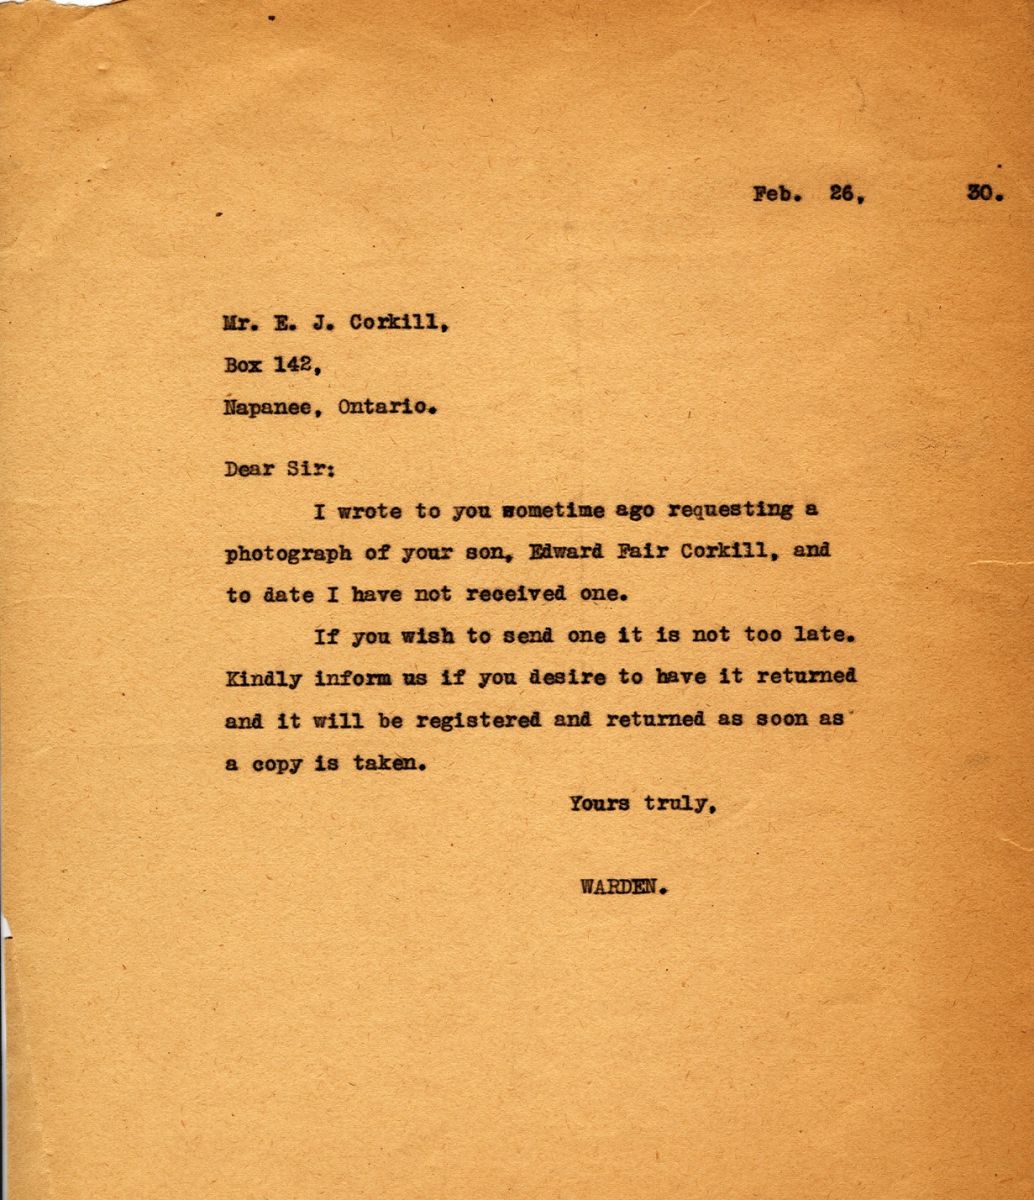 Letter from the Warden to Mr. E.J. Corkill, 26th February 1930